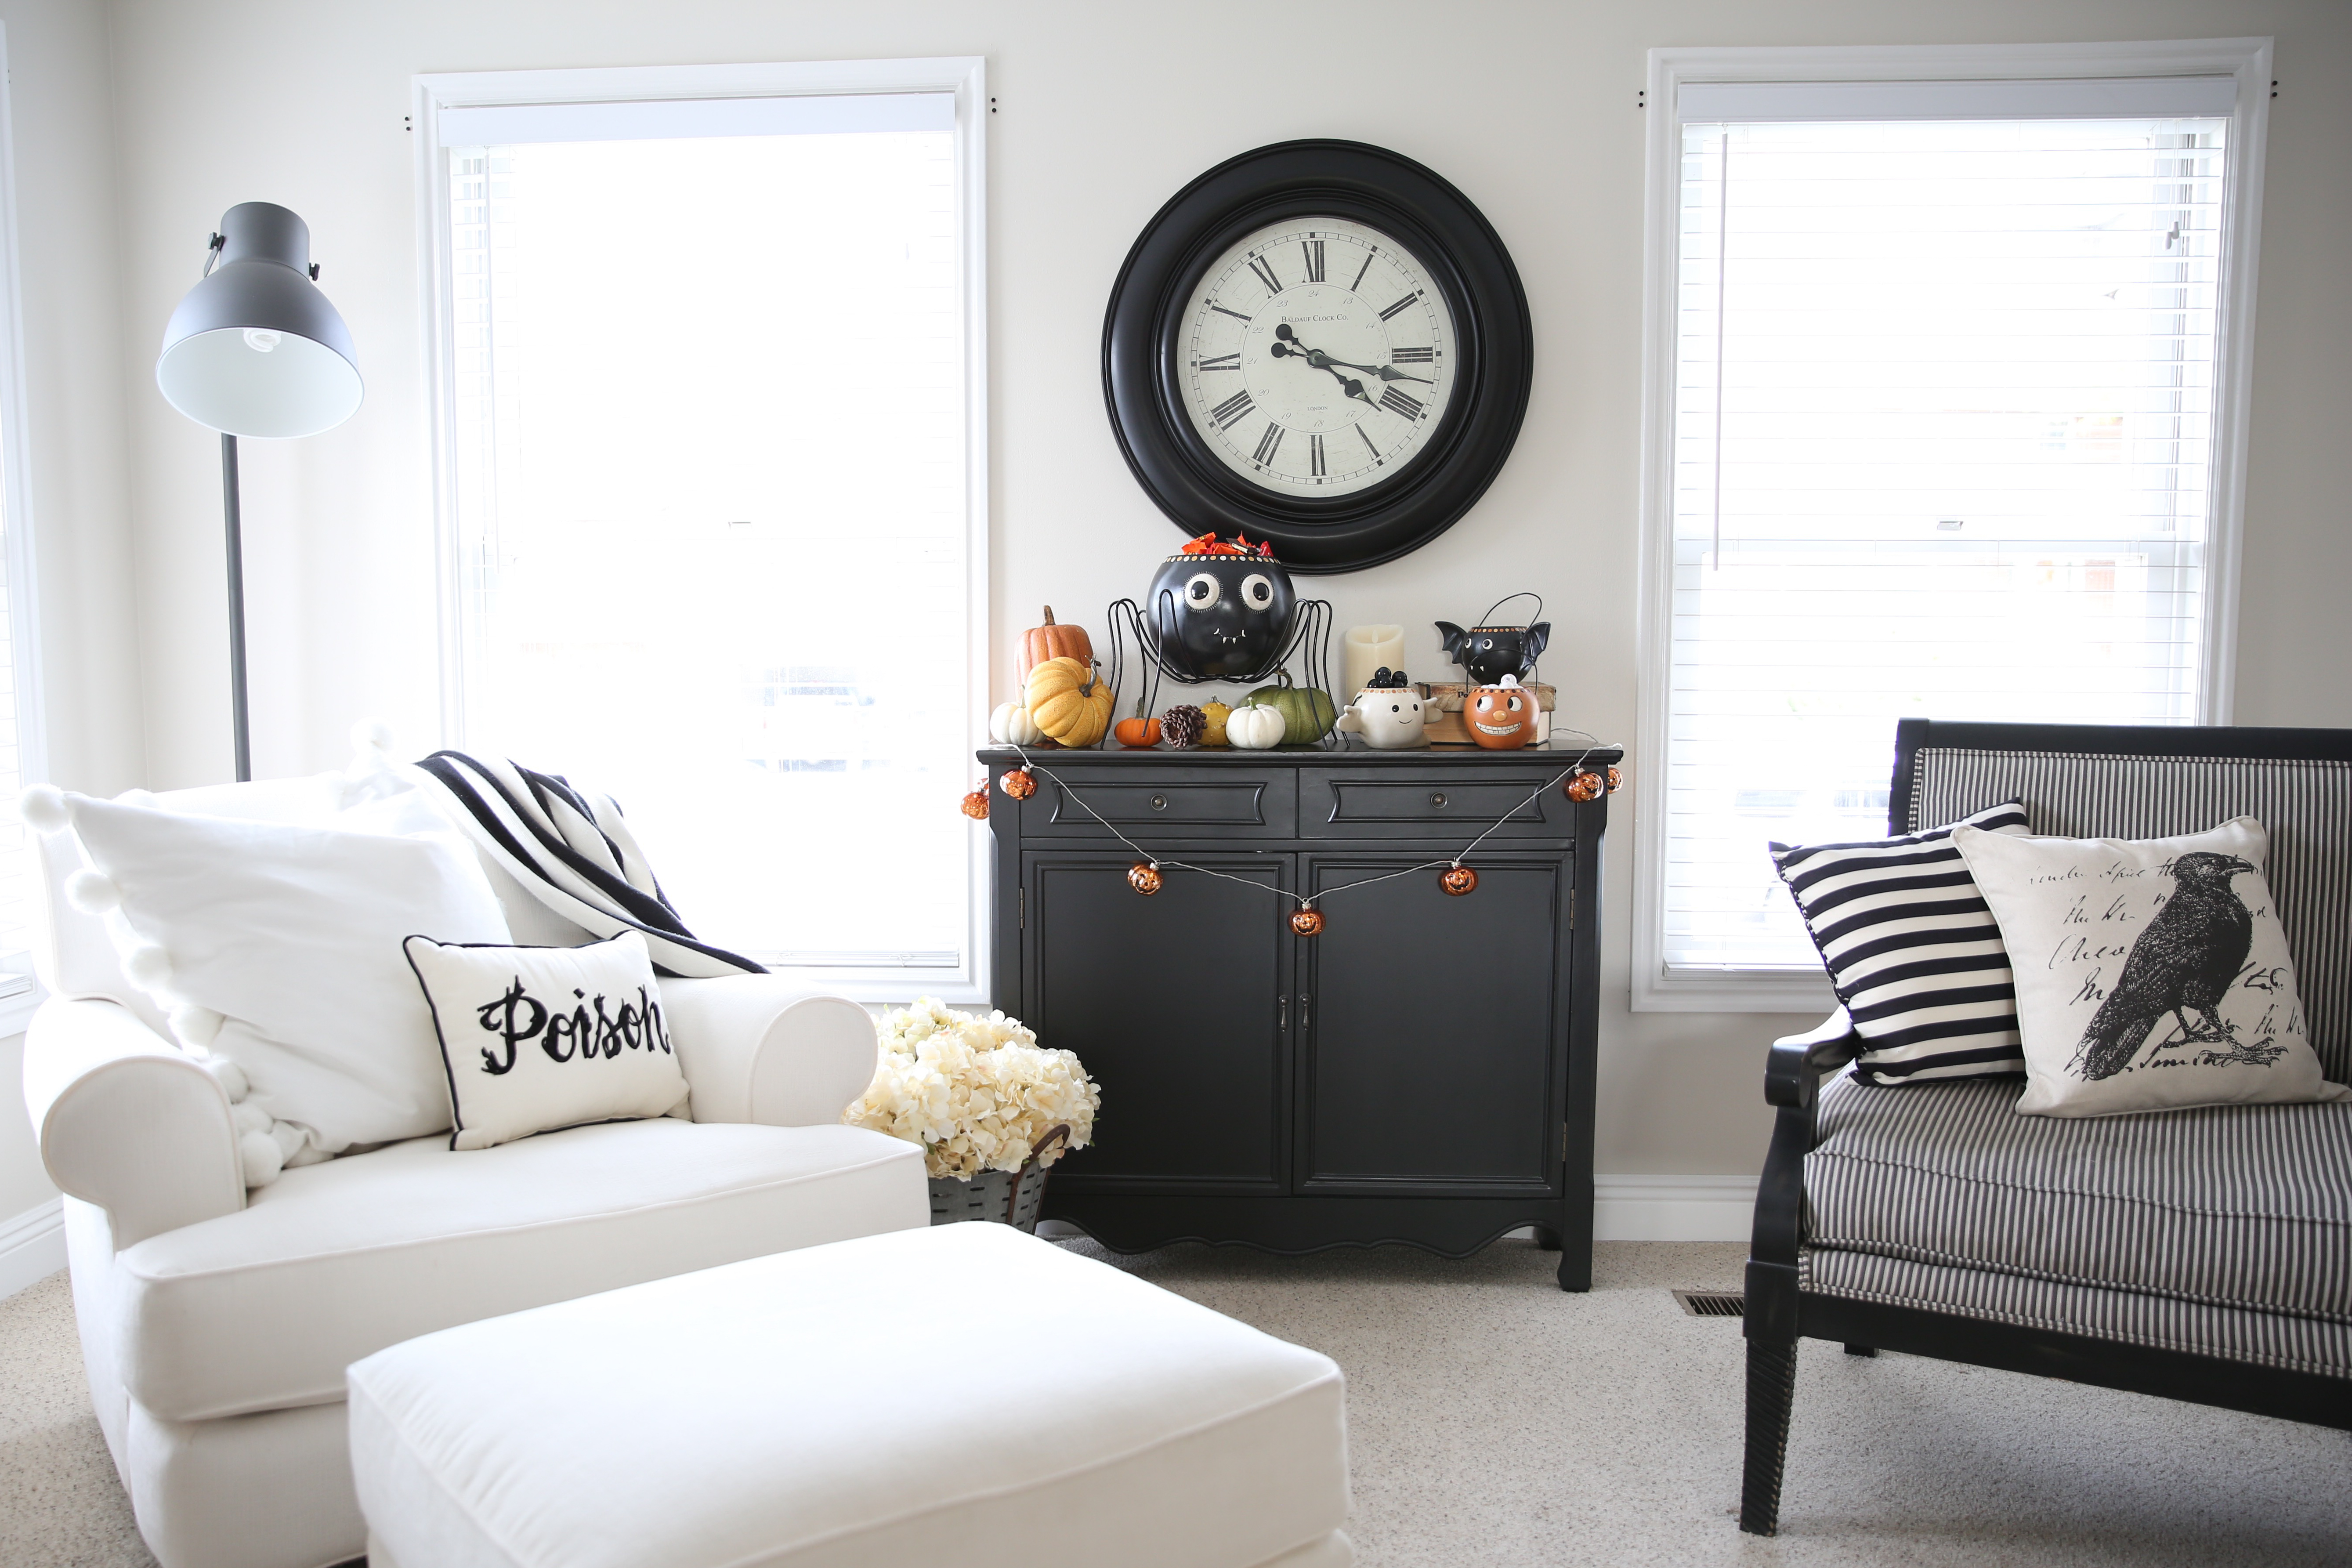 Halloween Home Decorating Tour And A Giveaway The Idea Room